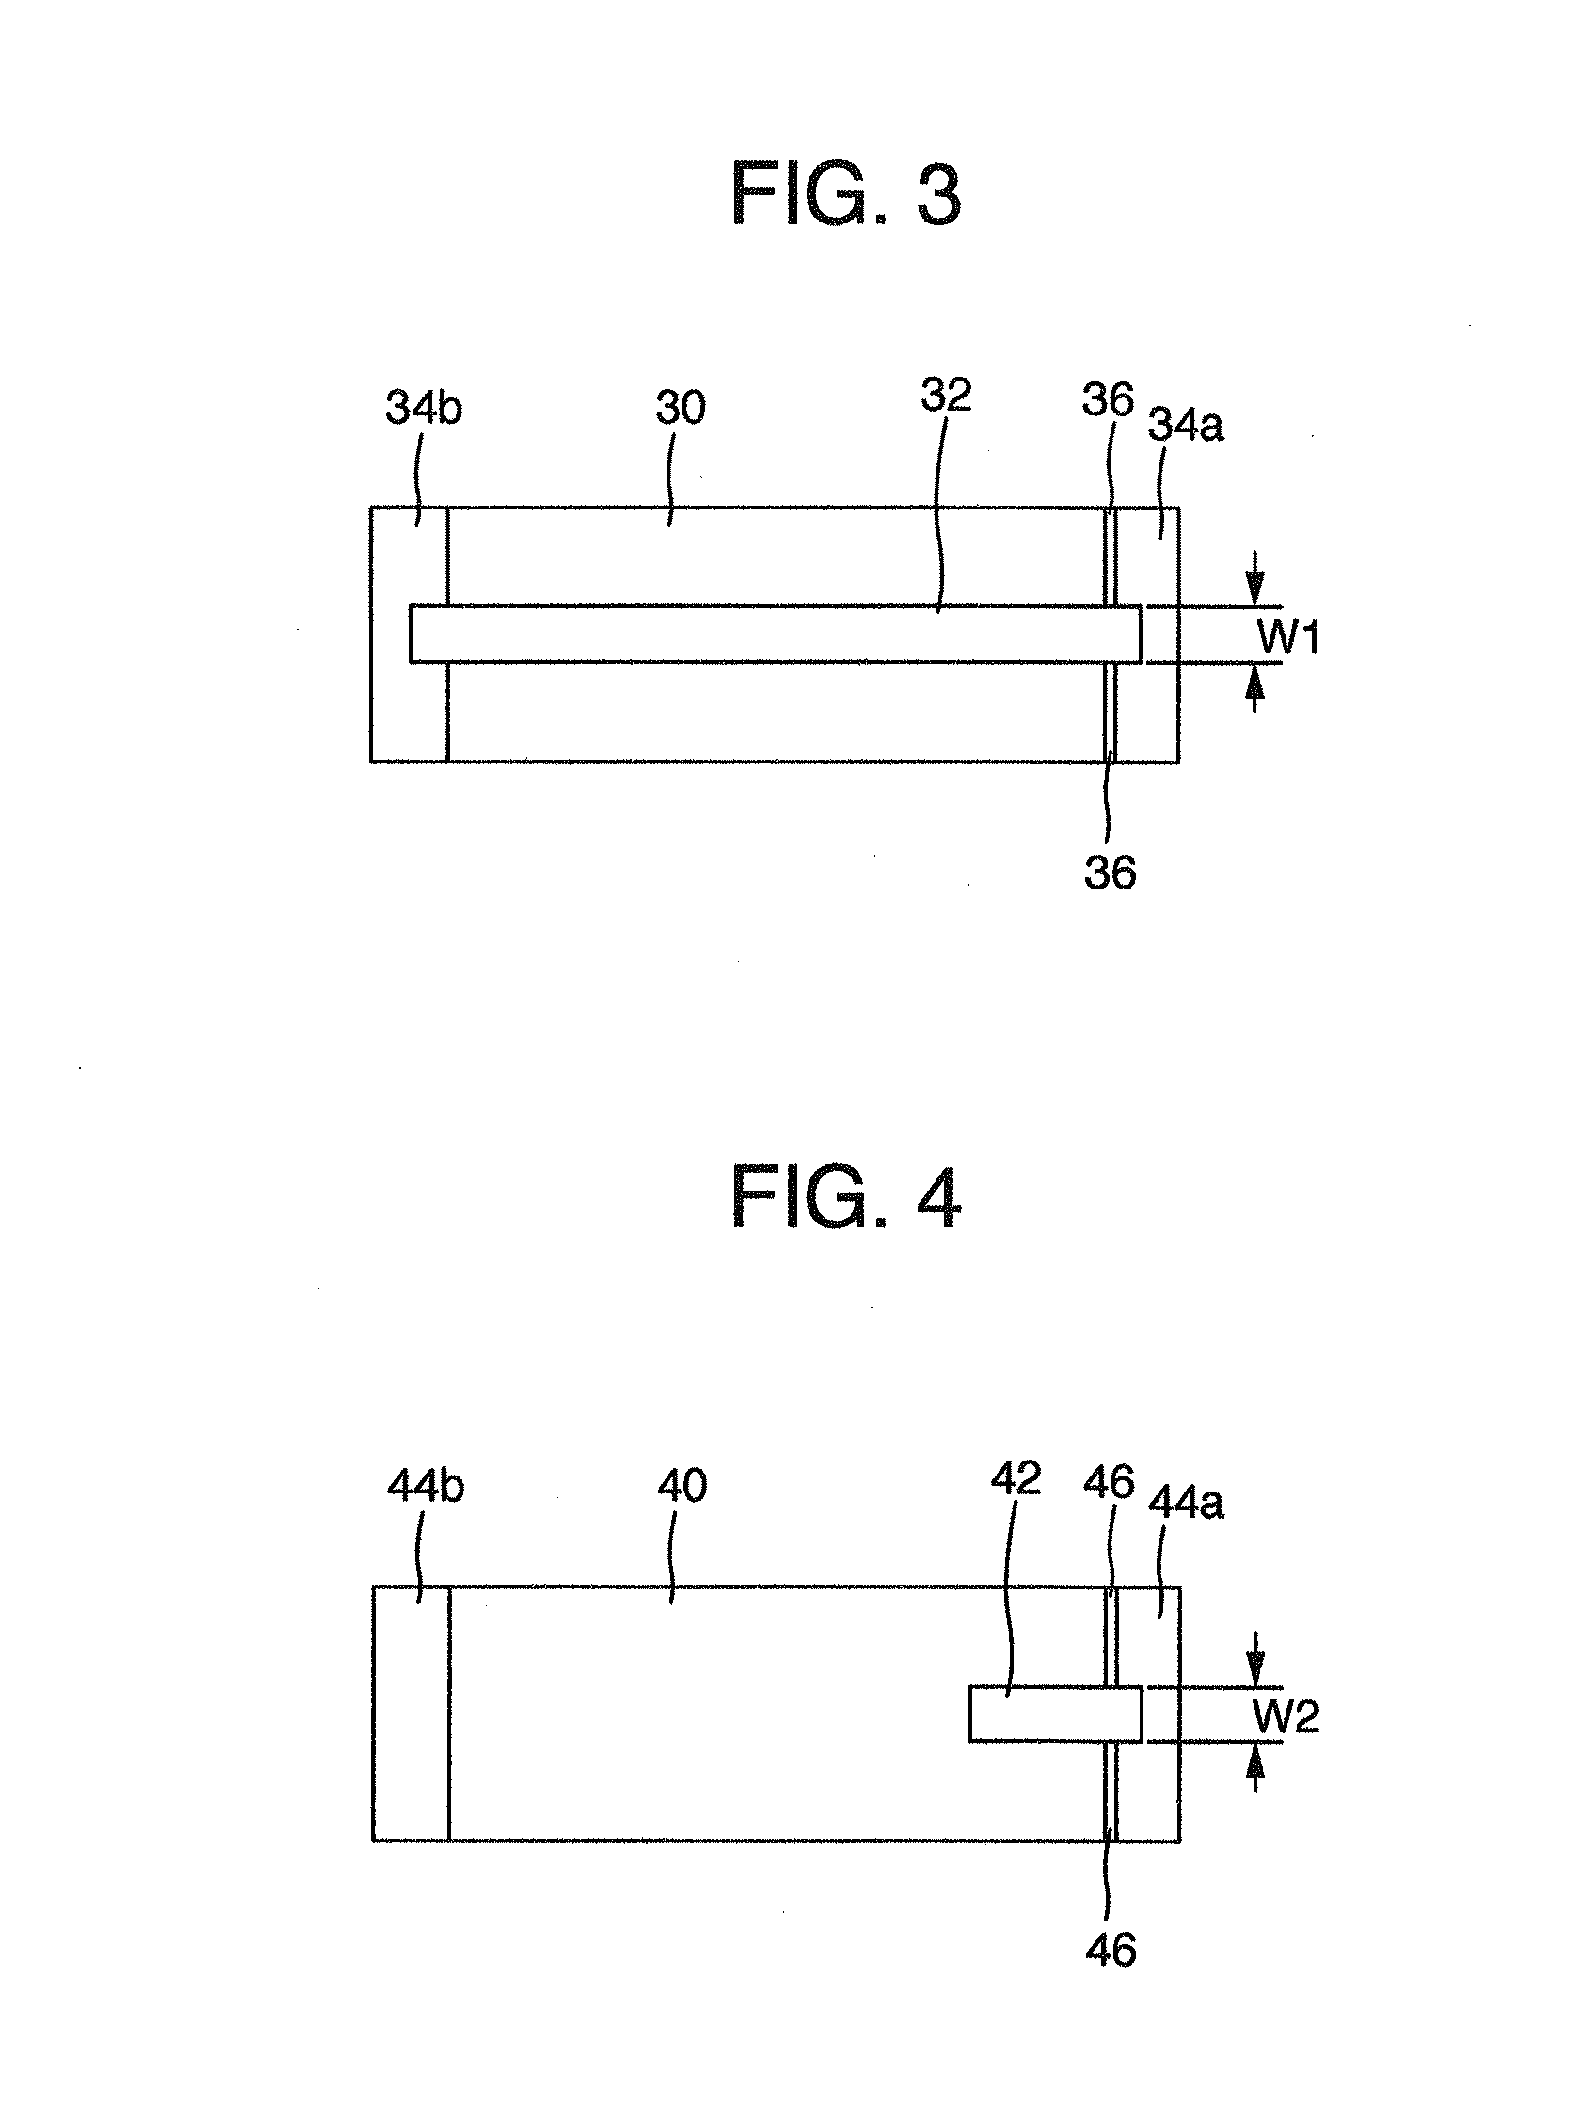 Sliding bearing for internal combustion engines